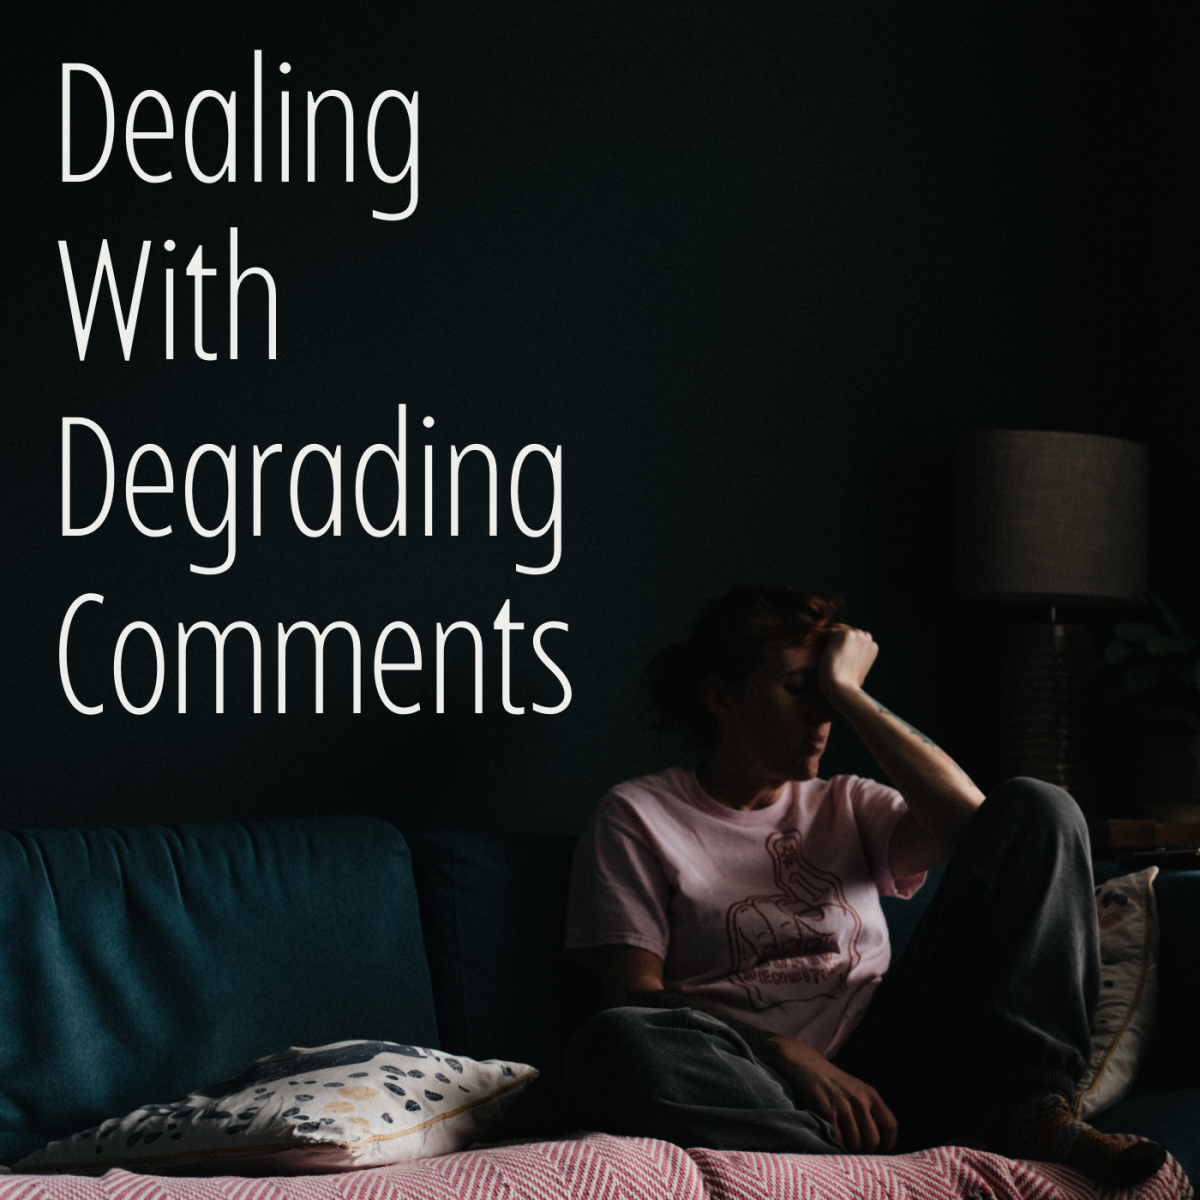 Learn how to cope when someone makes a mean, degrading remark about you.